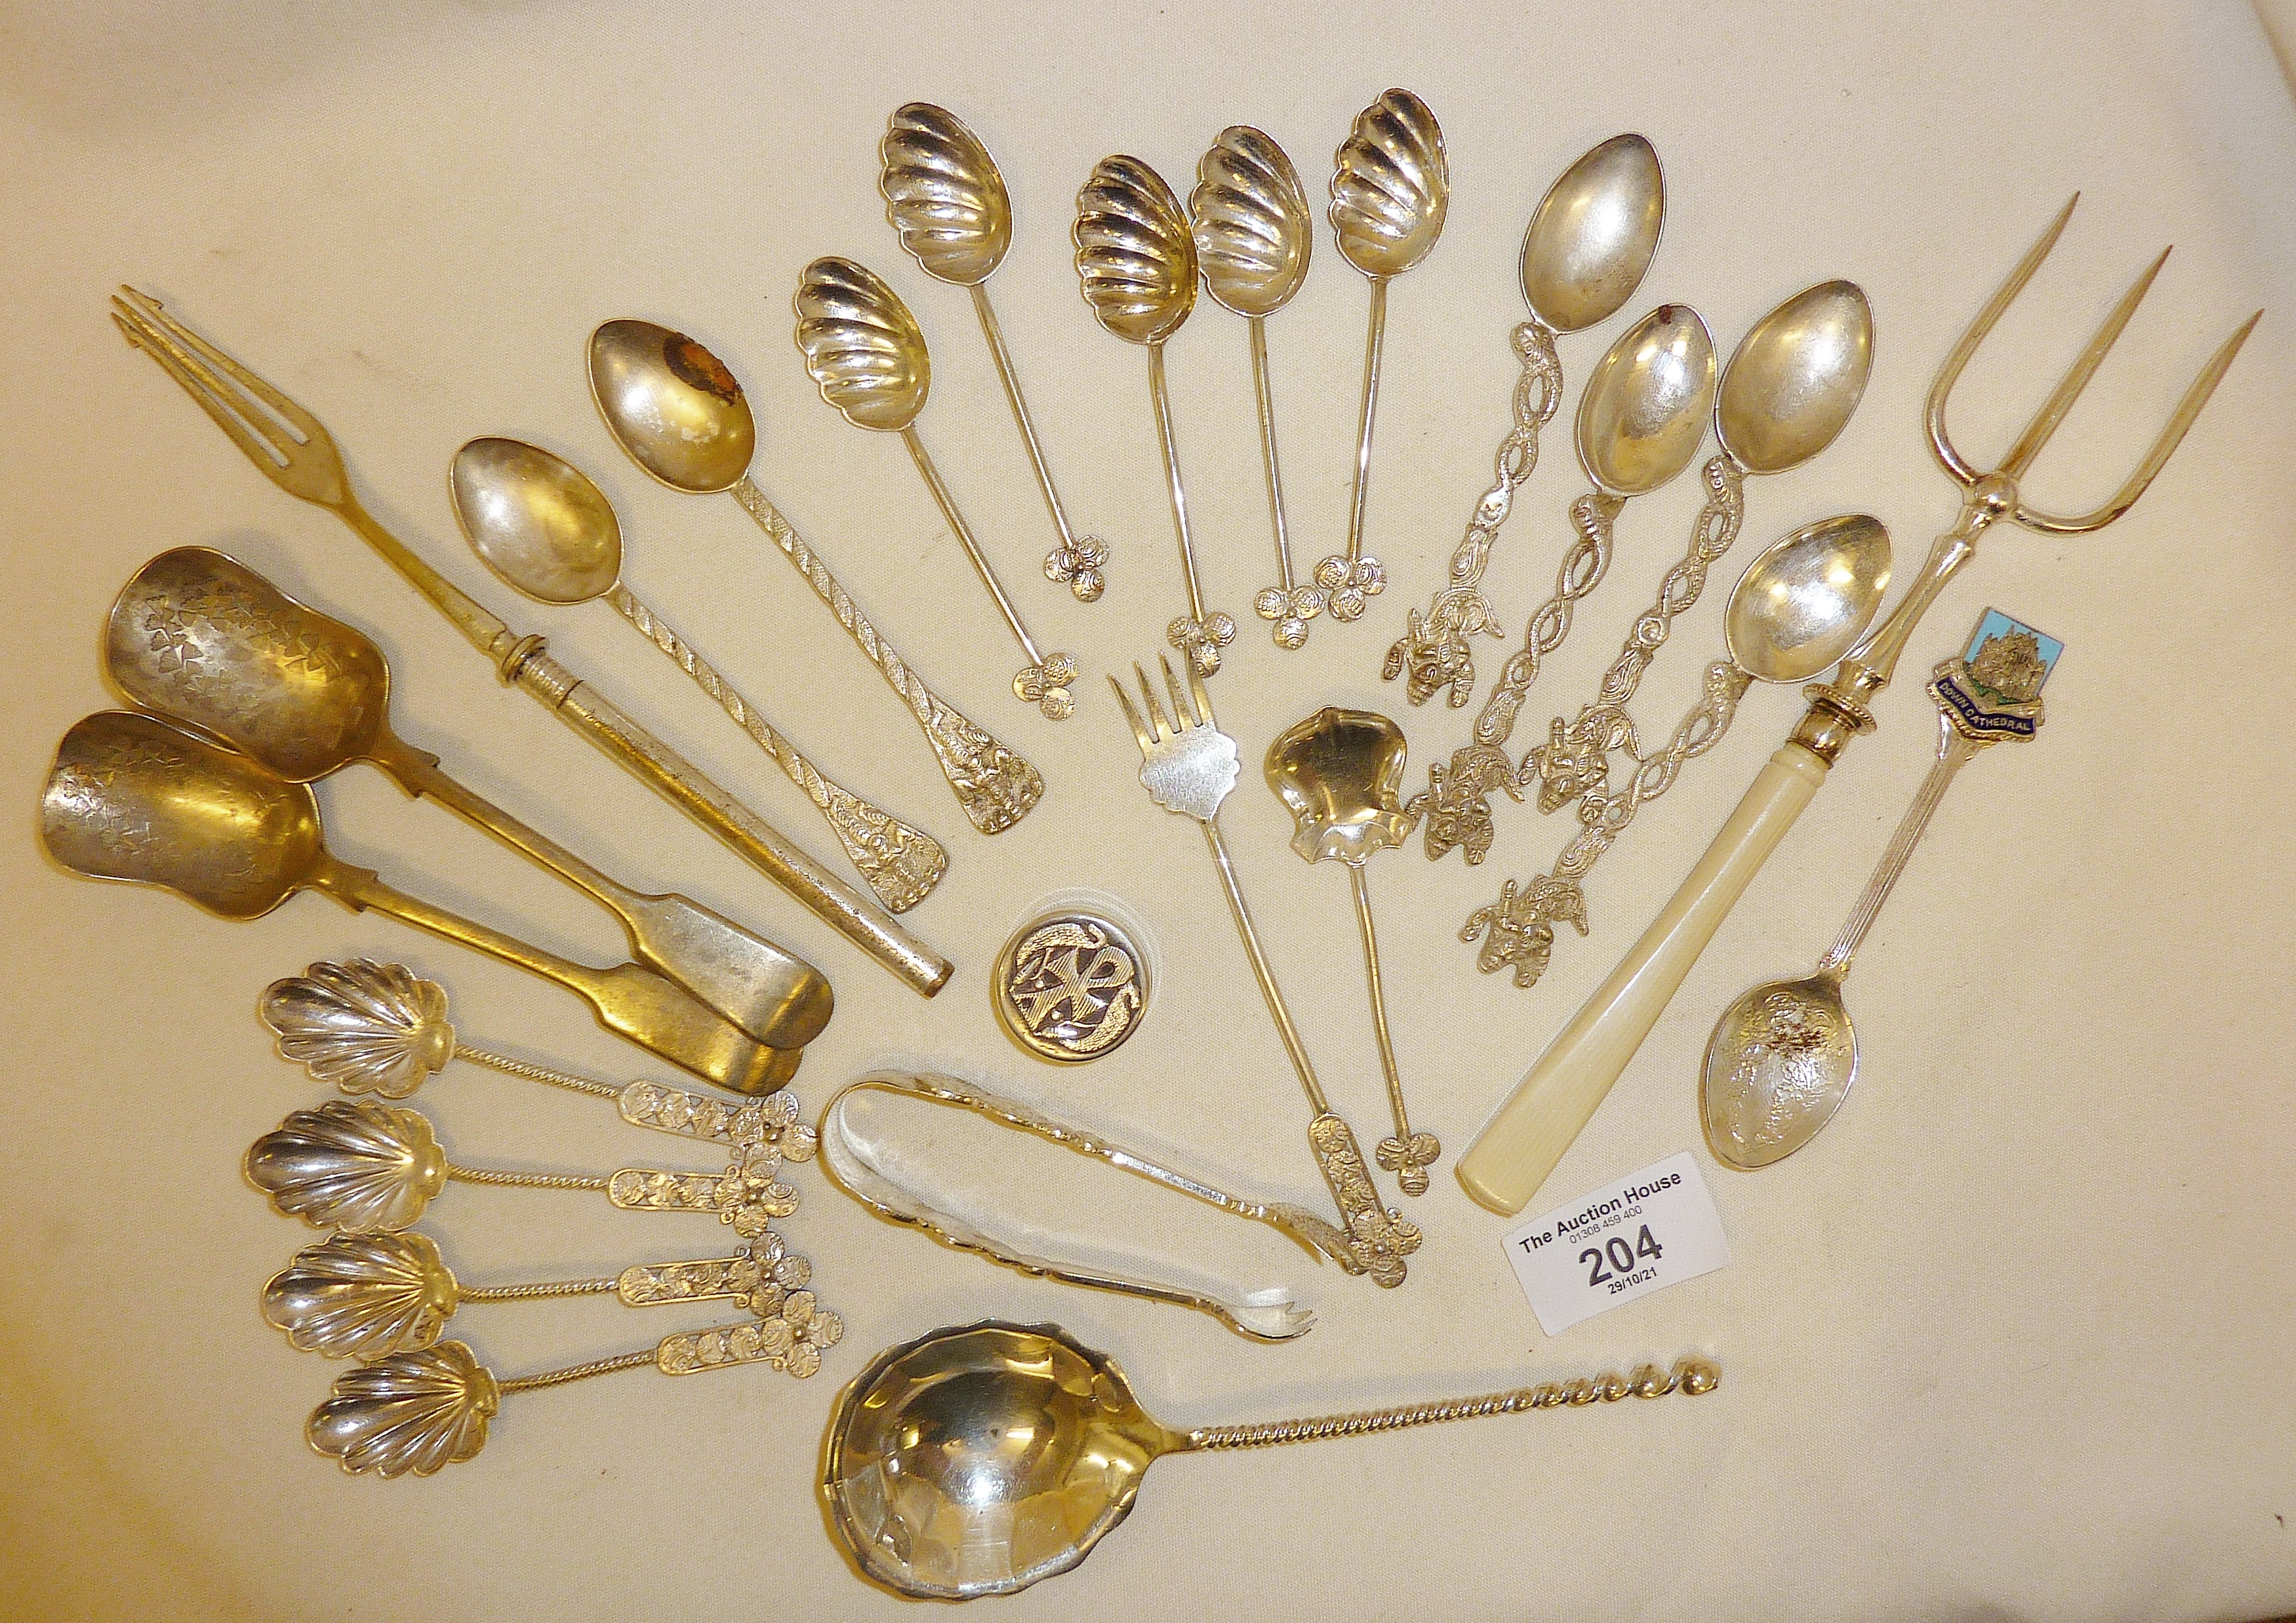 Silver plate and white metal spoons and other cutlery, including one larger spoon with twisted